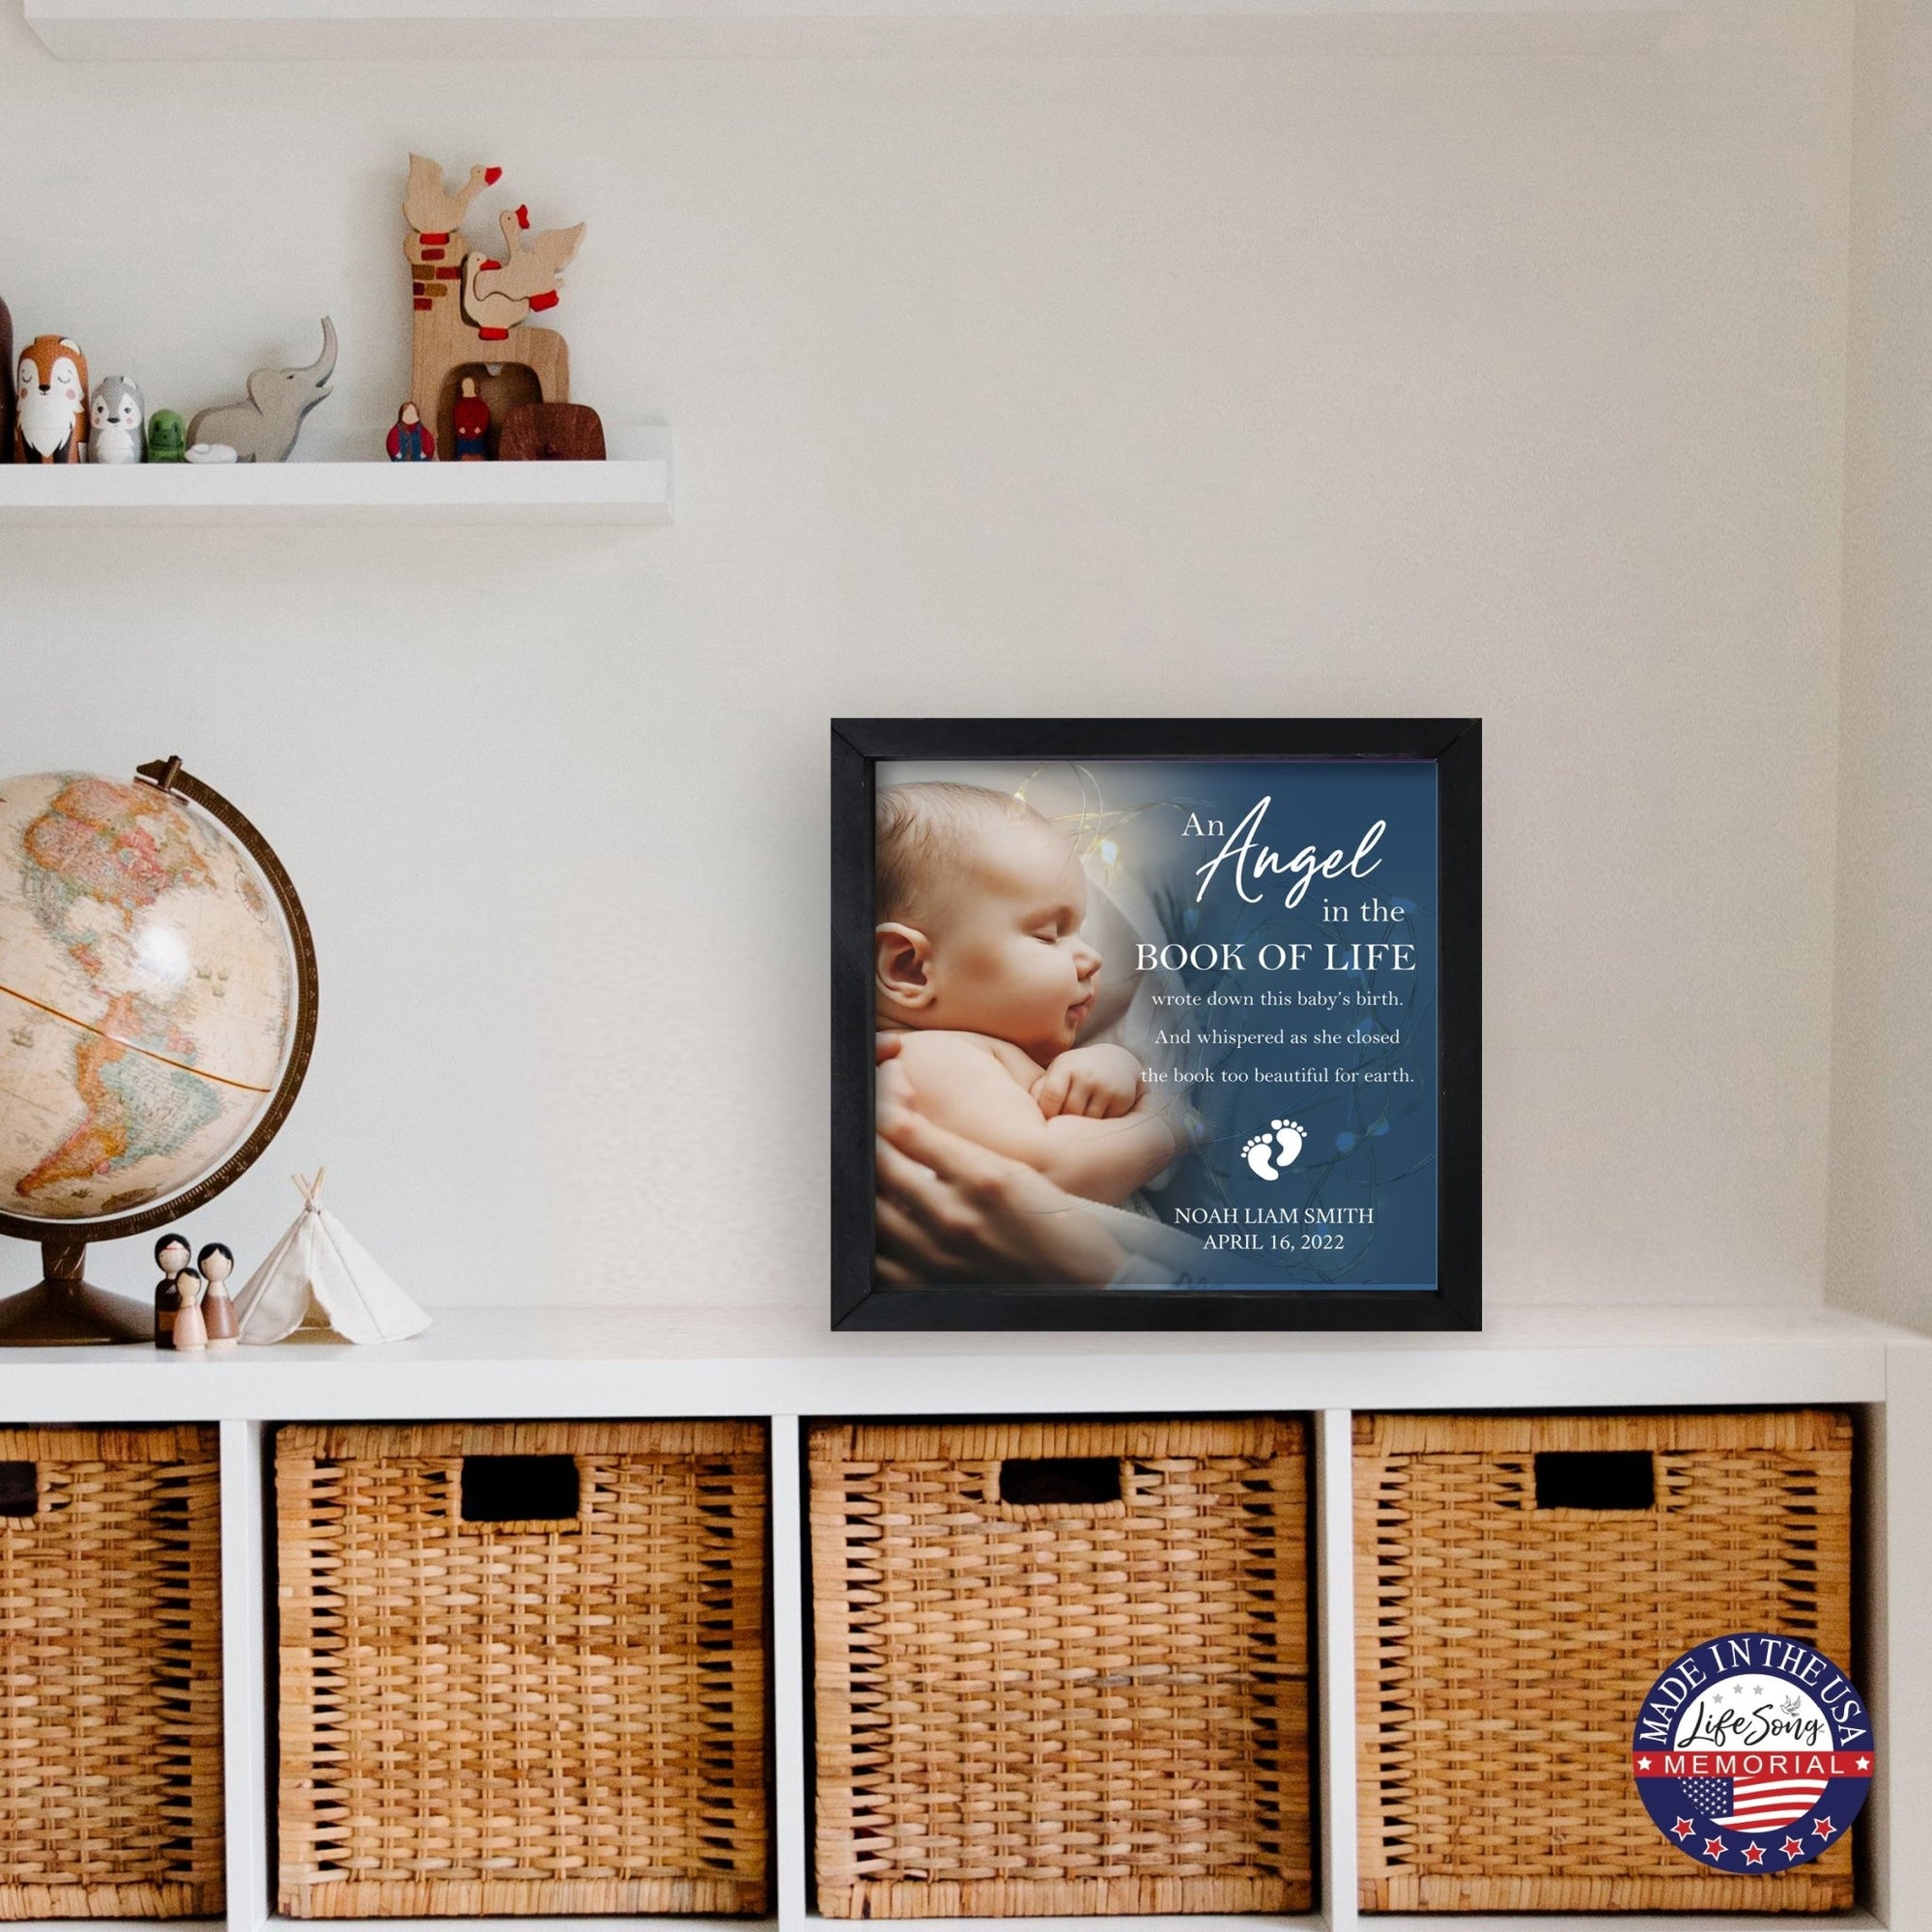 Personalized Memorial Black Framed Shadow Box With Lights Sympathy Gift & Wall Décor - An Angel In The Book - LifeSong Milestones